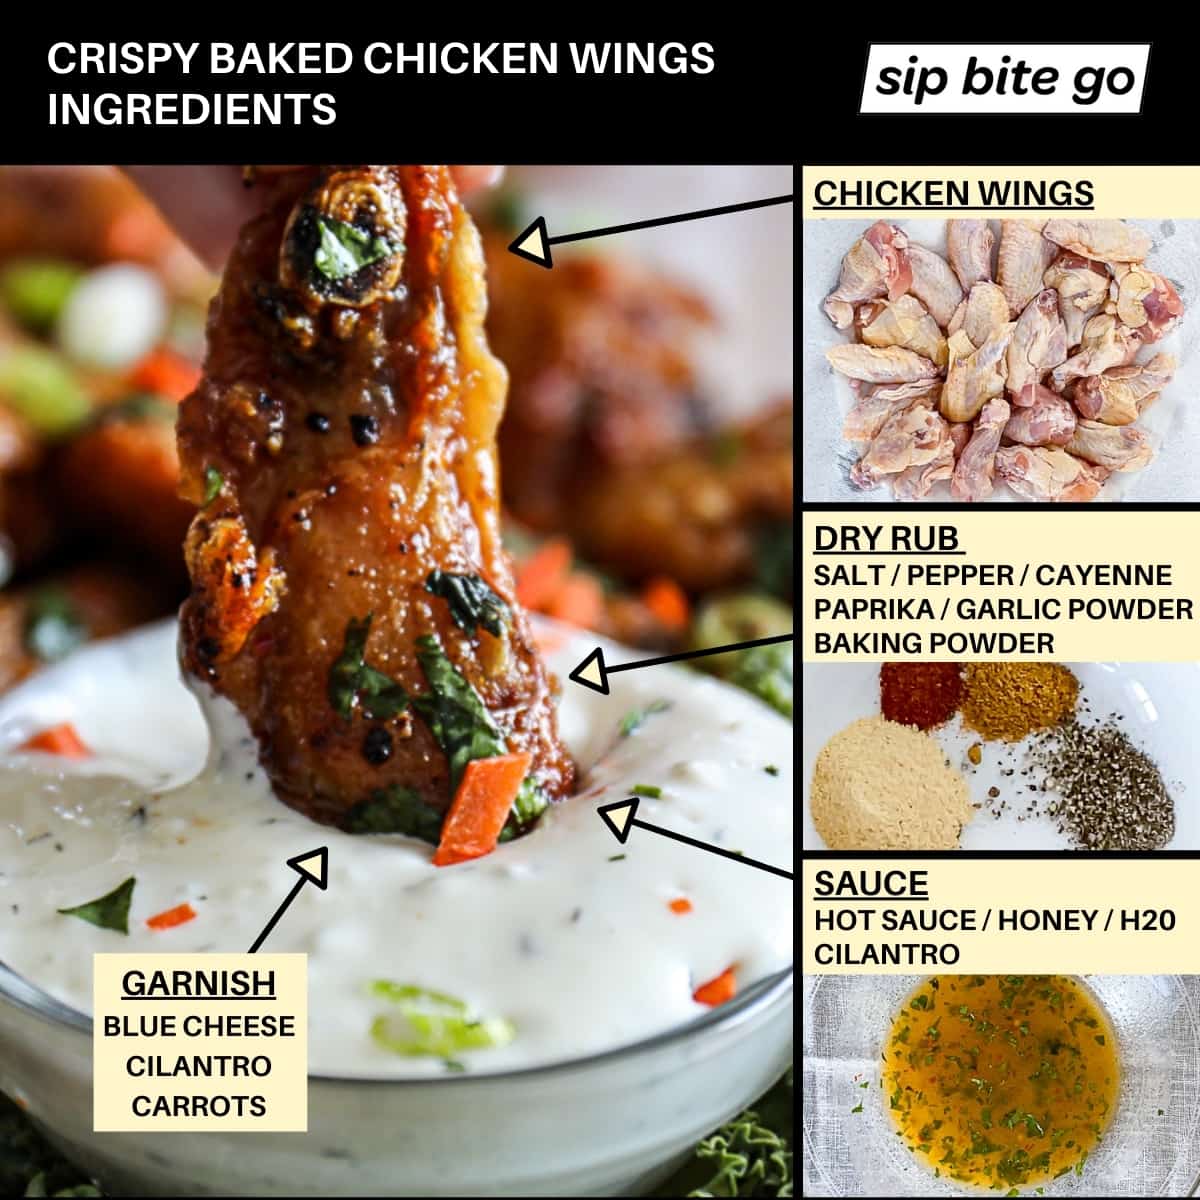 Image graphic with text ingredients for making chicken wings in the oven including dry rub and hot wings sauce.